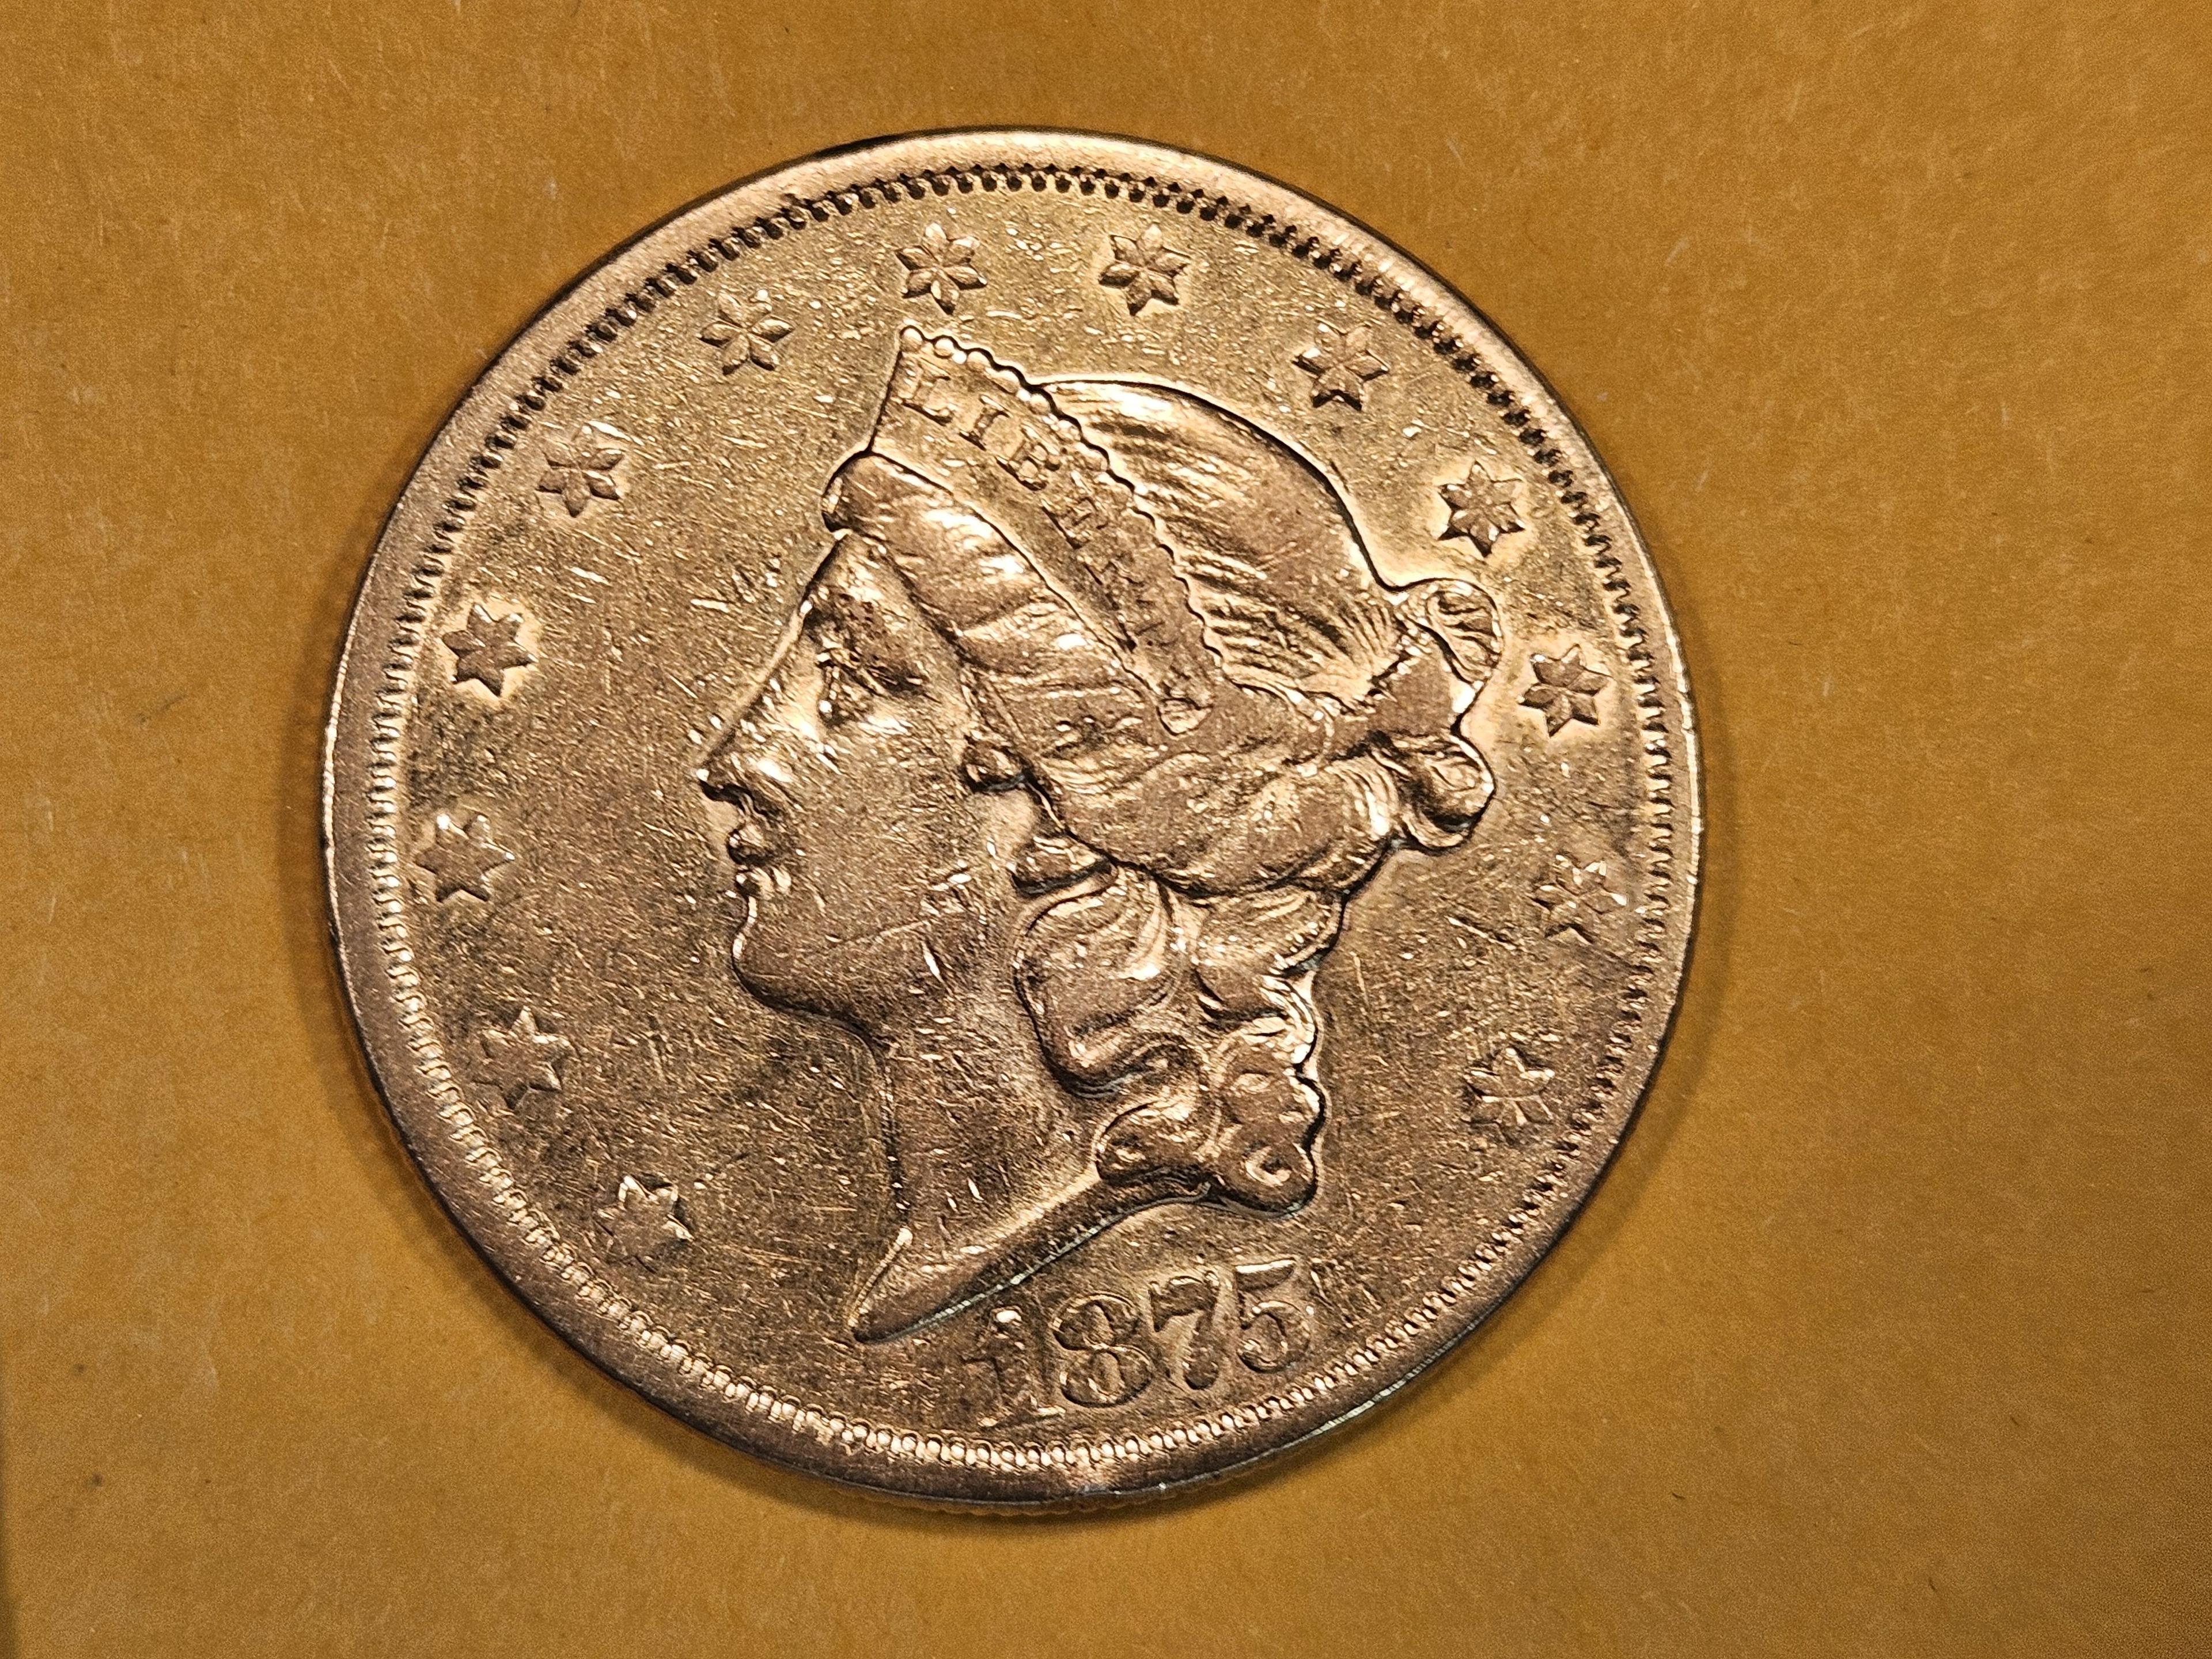 GOLD! 1875-S Type 2 Liberty Head Gold Twenty Dollars in Brilliant About Uncirculated